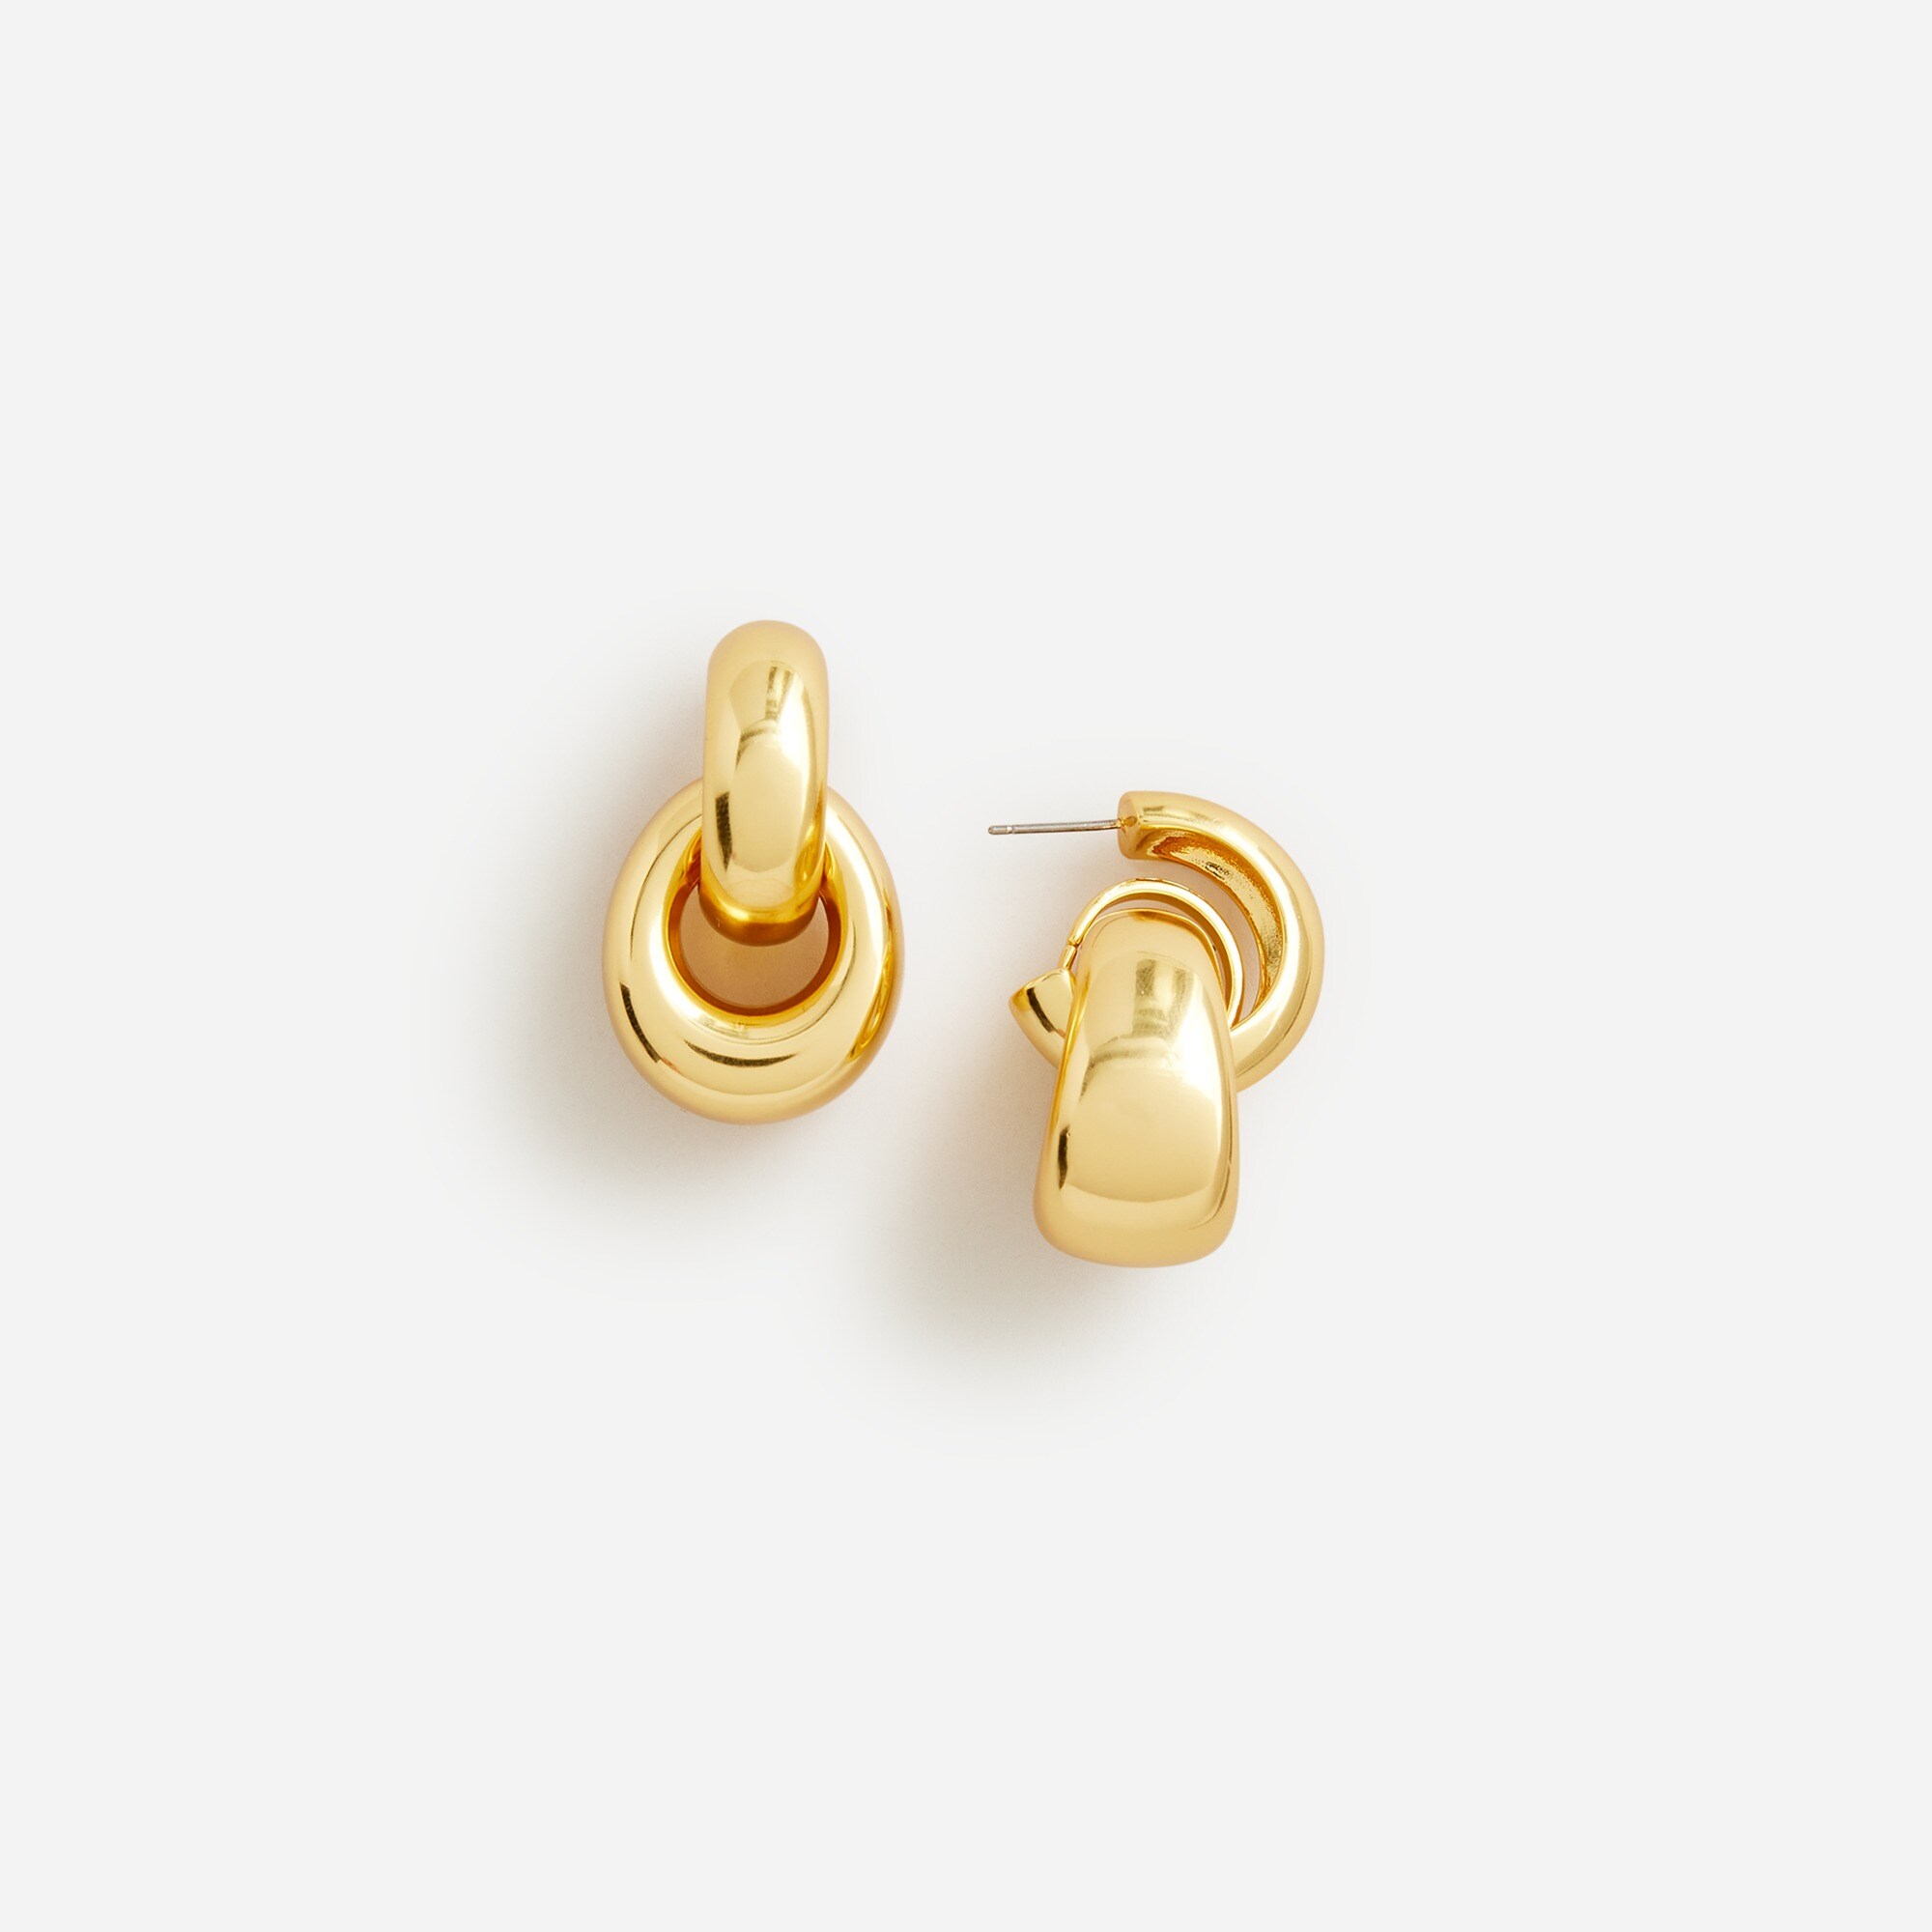  Rounded chainlink earrings